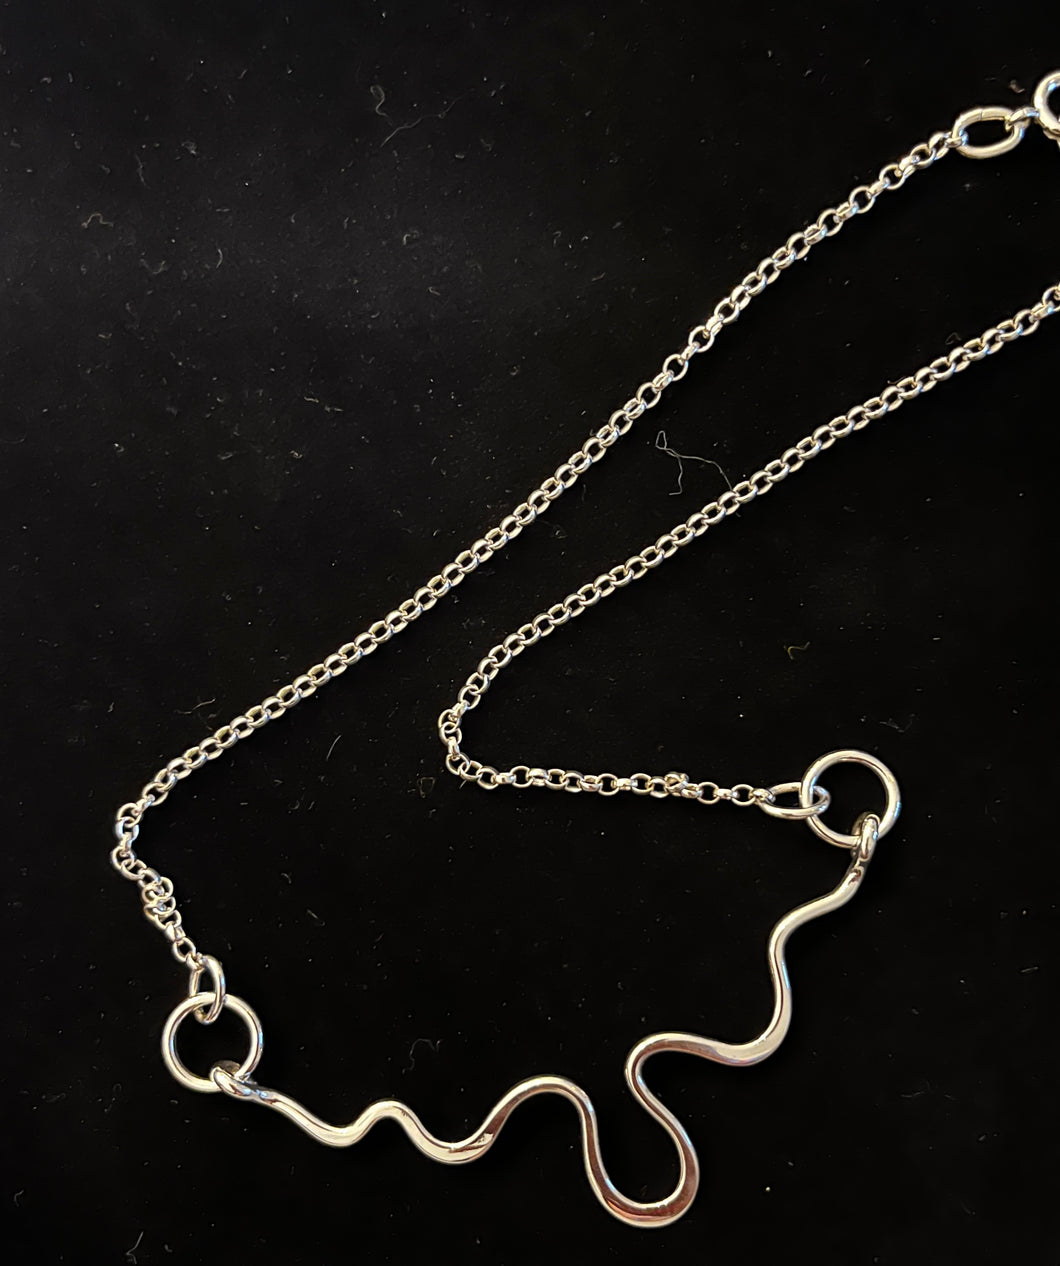 JB Silver Squiggle necklace